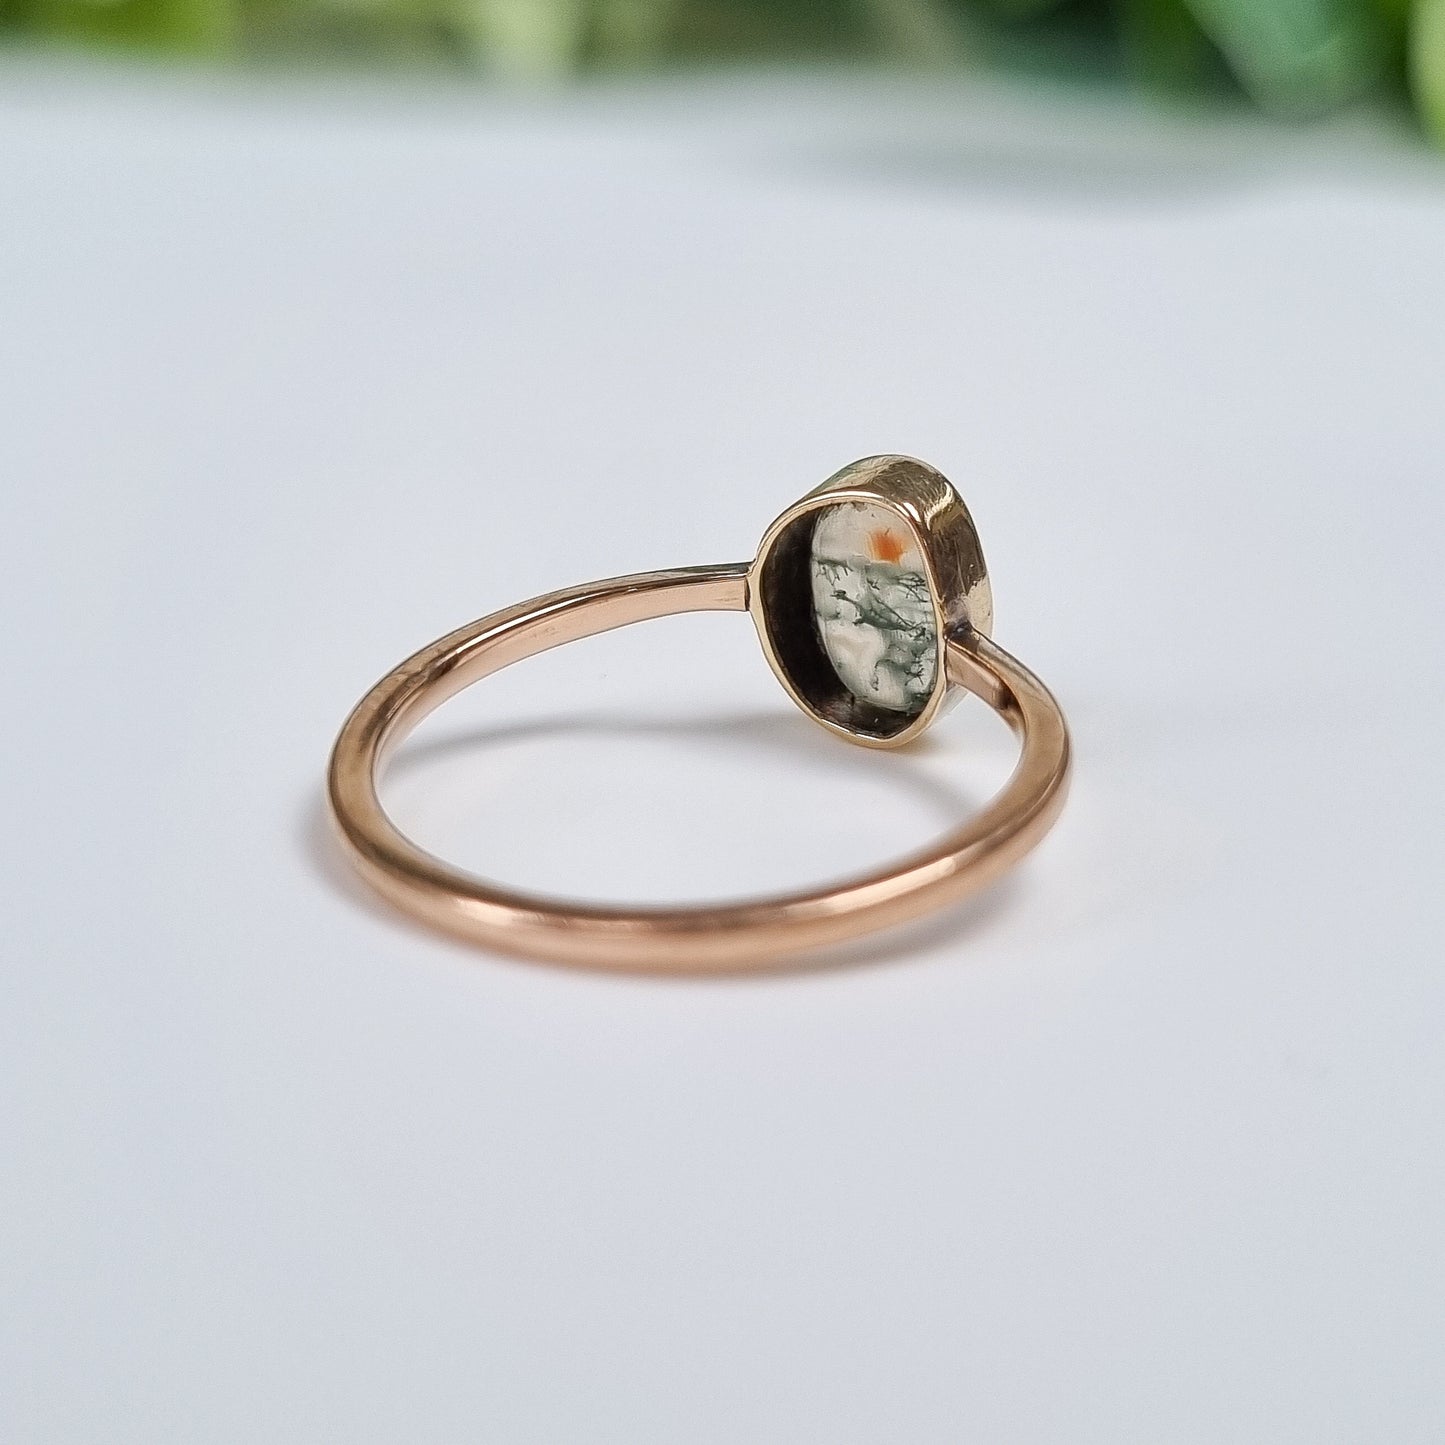 Vintage 9ct Yellow Gold Moss Agate Ring